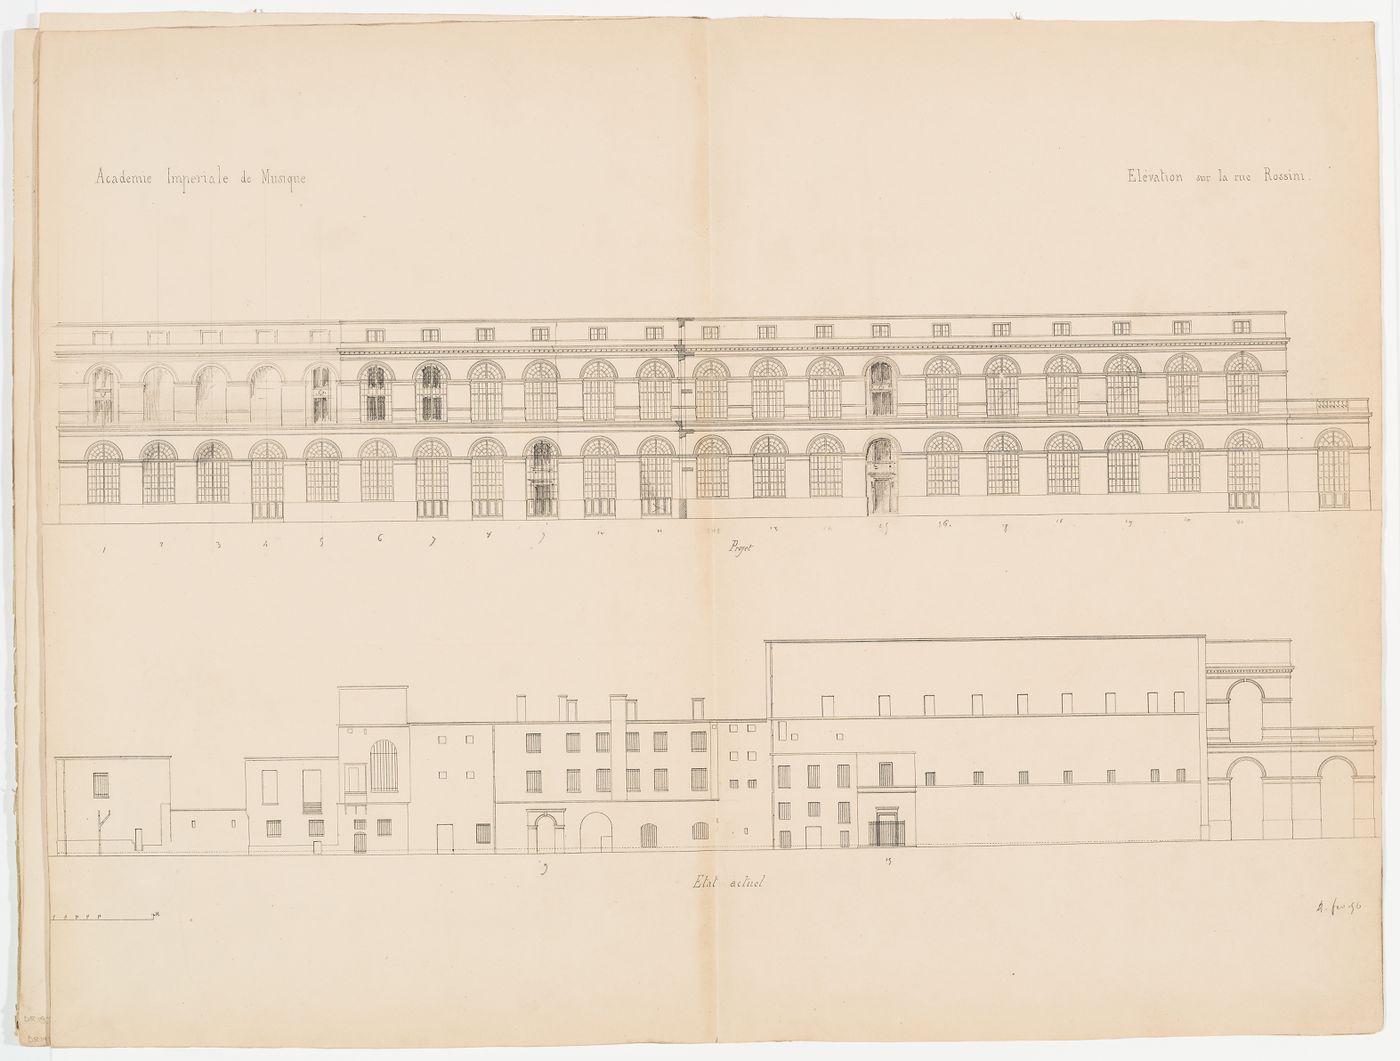 Side elevations of Salle Le Peletier, one with additions for alterations